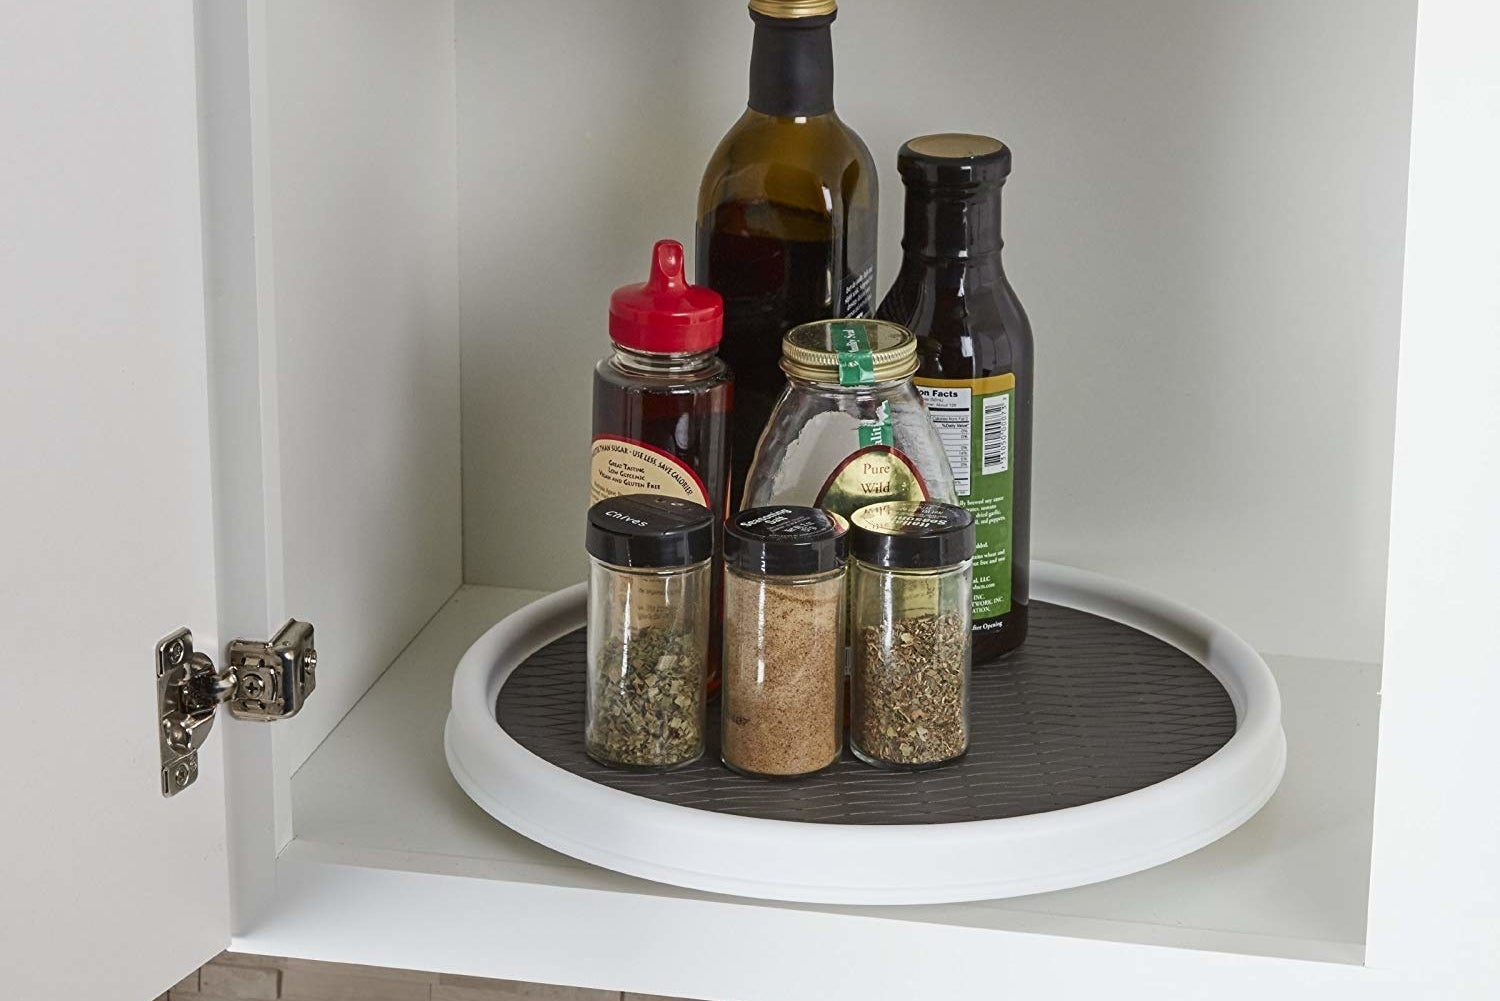 the lazy susan in cabinet with spices and condiments on it